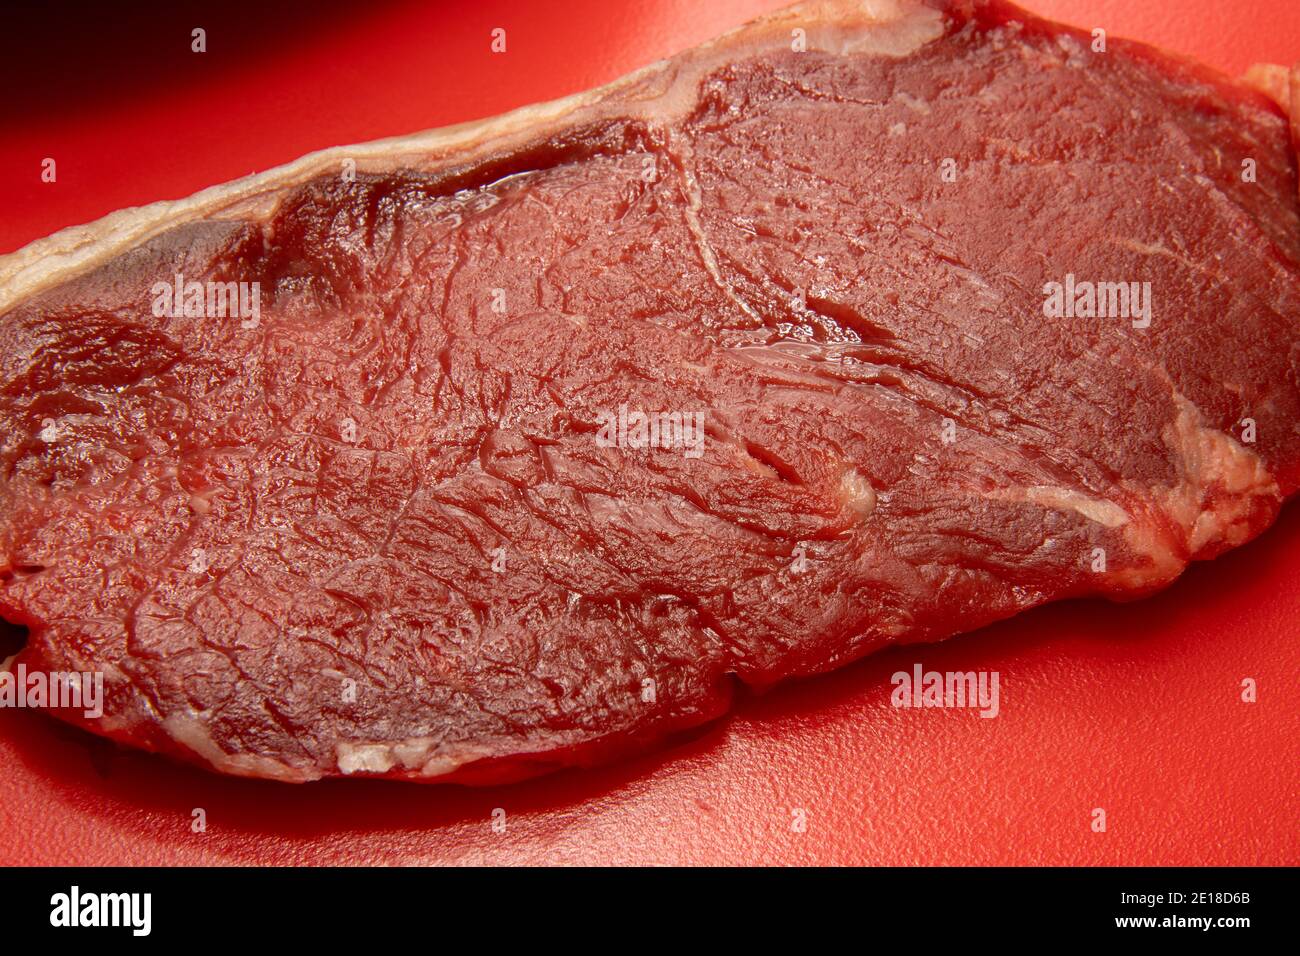 A raw un-cooked beef stake Stock Photo